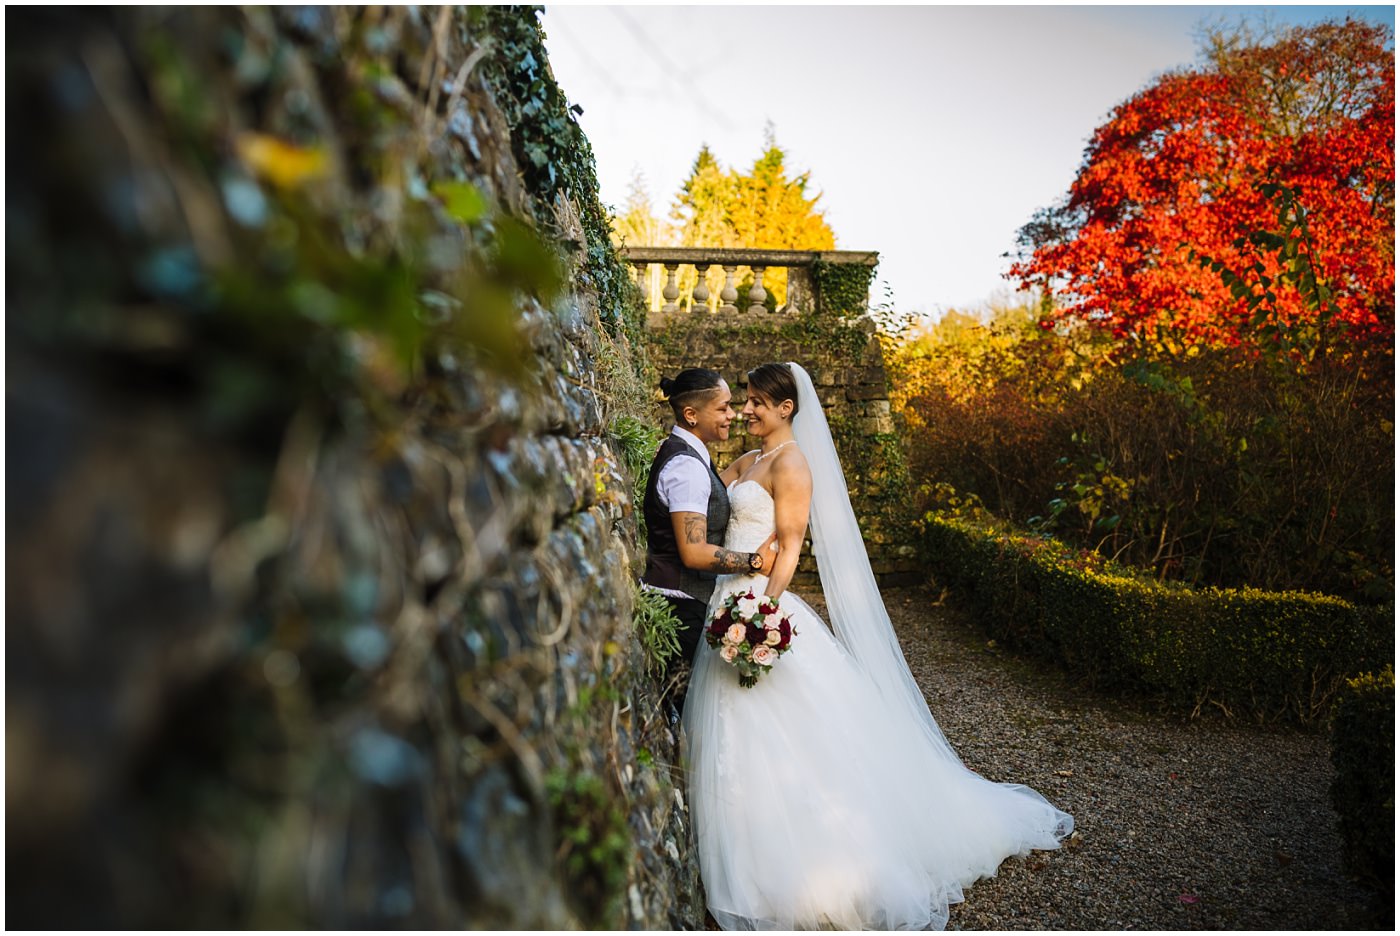 Gorgeous autumnal colours for same sex wedding at Eaves Hall